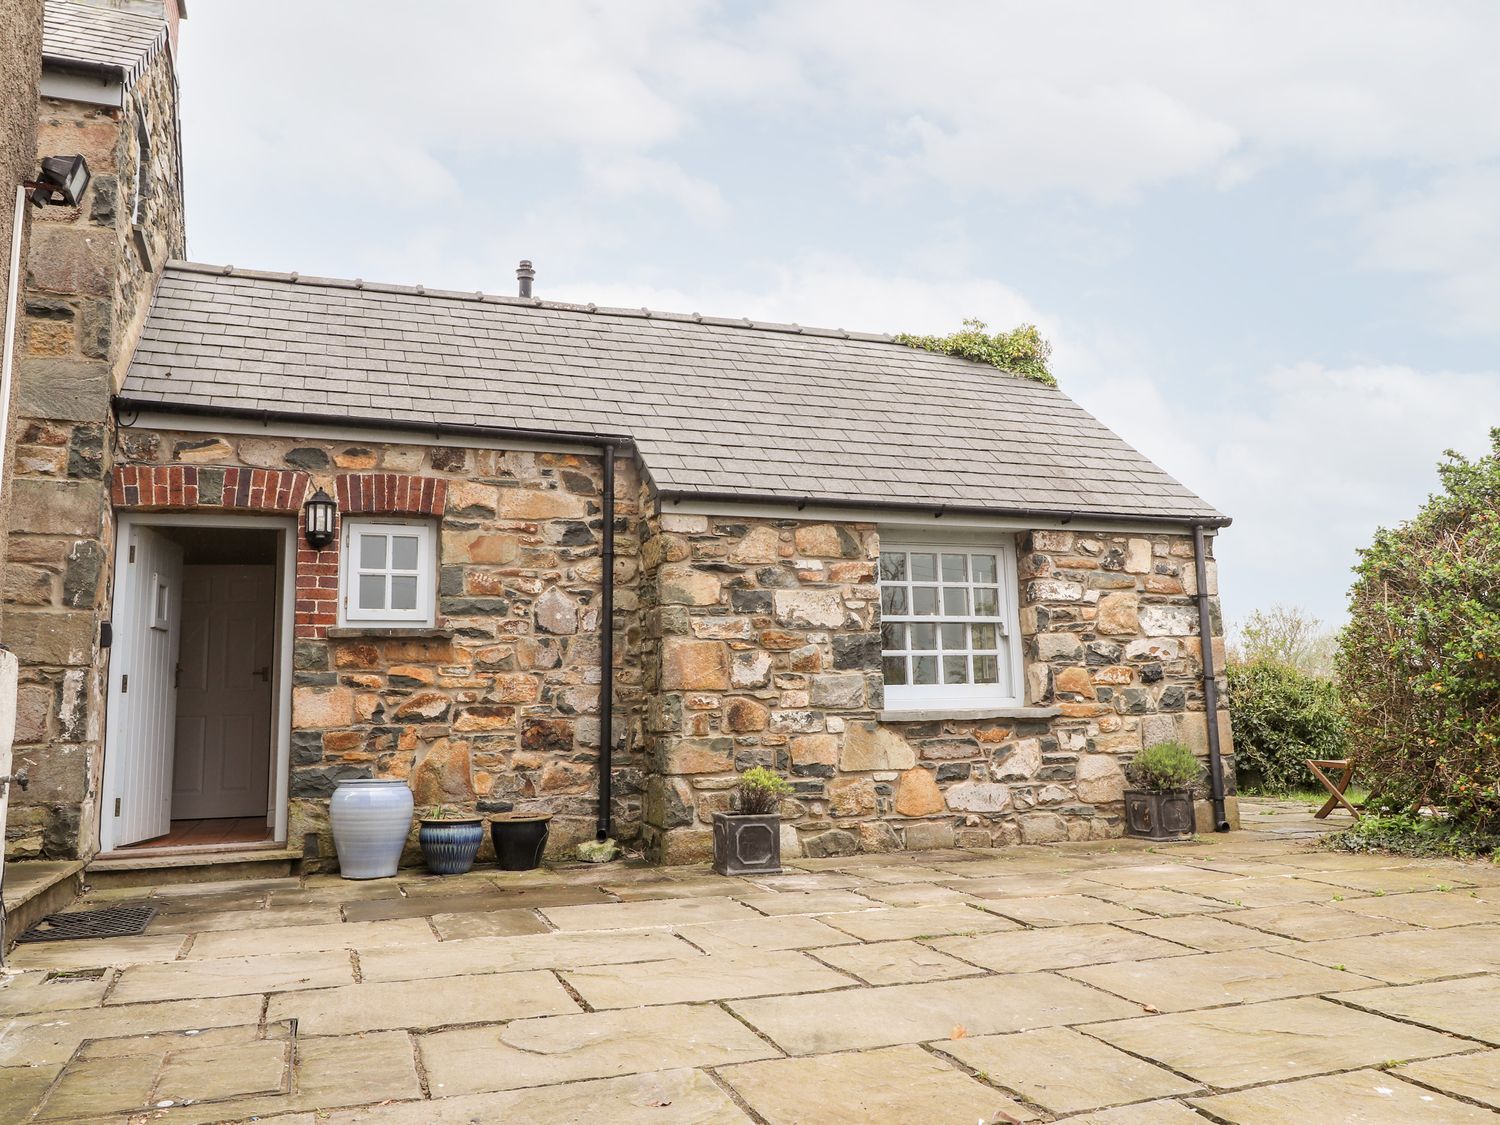 Spring Hill Cottage - South Wales - 1078706 - photo 1